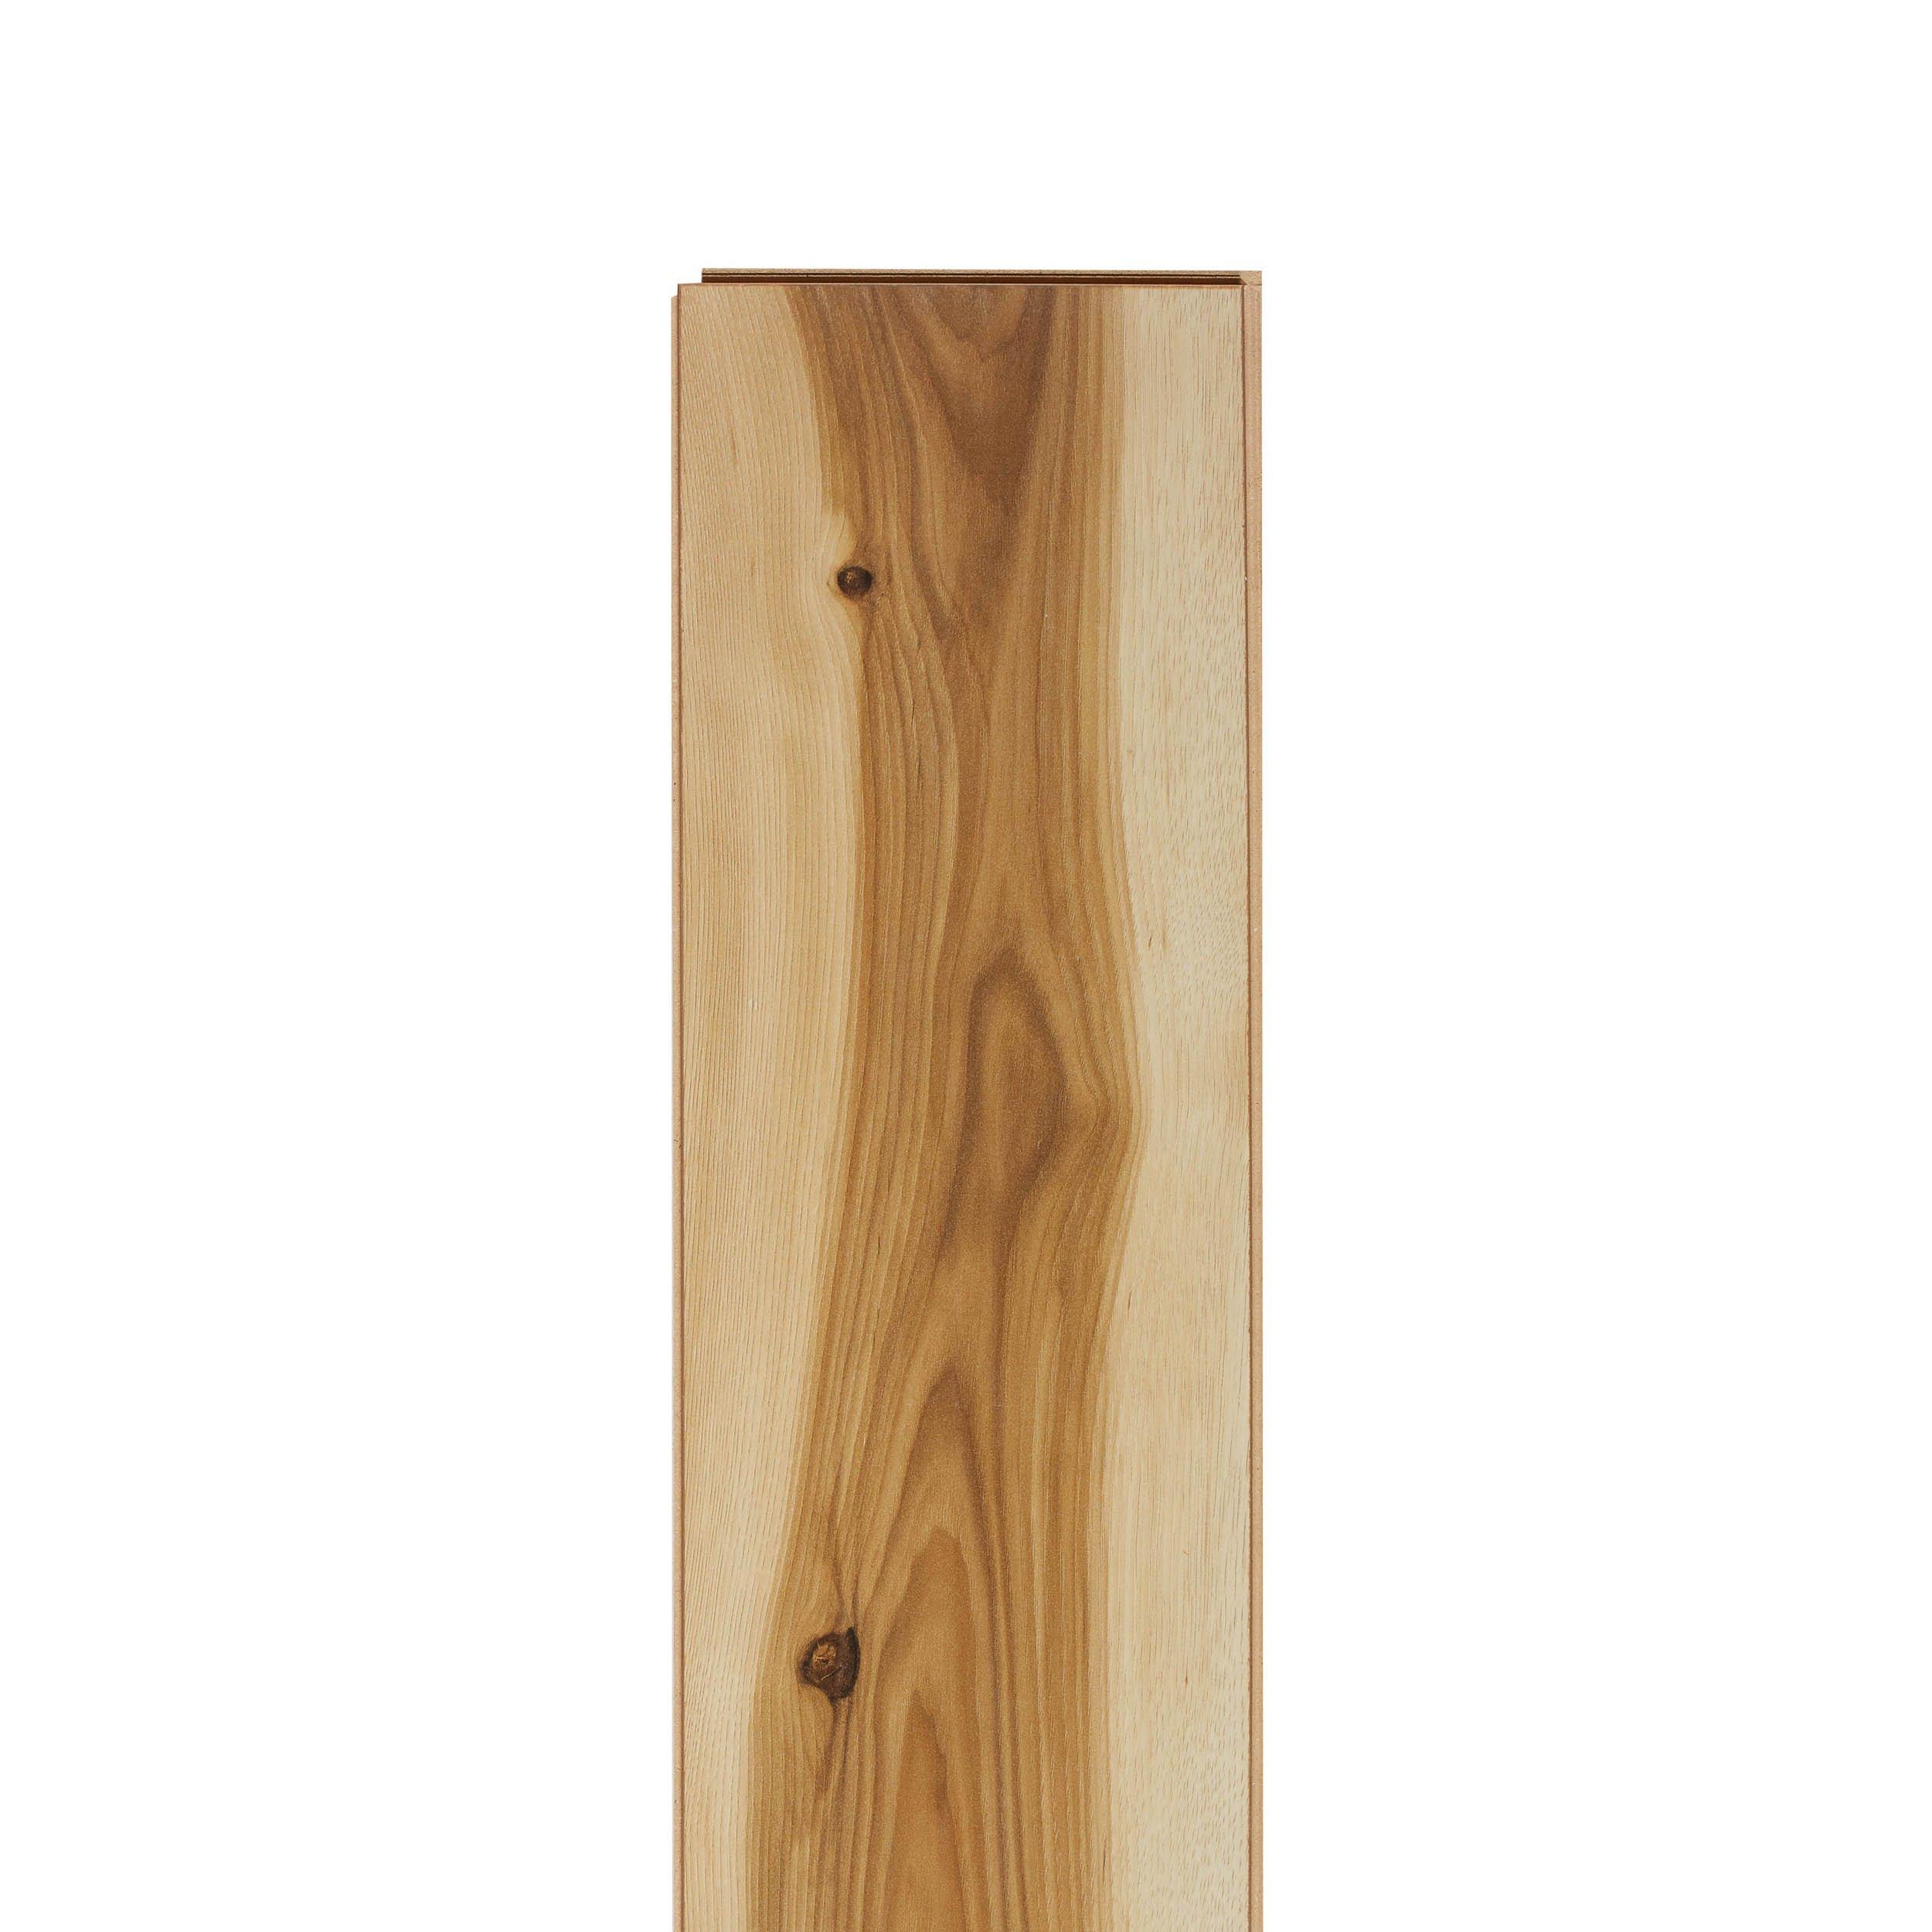 Whitegrove Hickory Water-Resistant Laminate